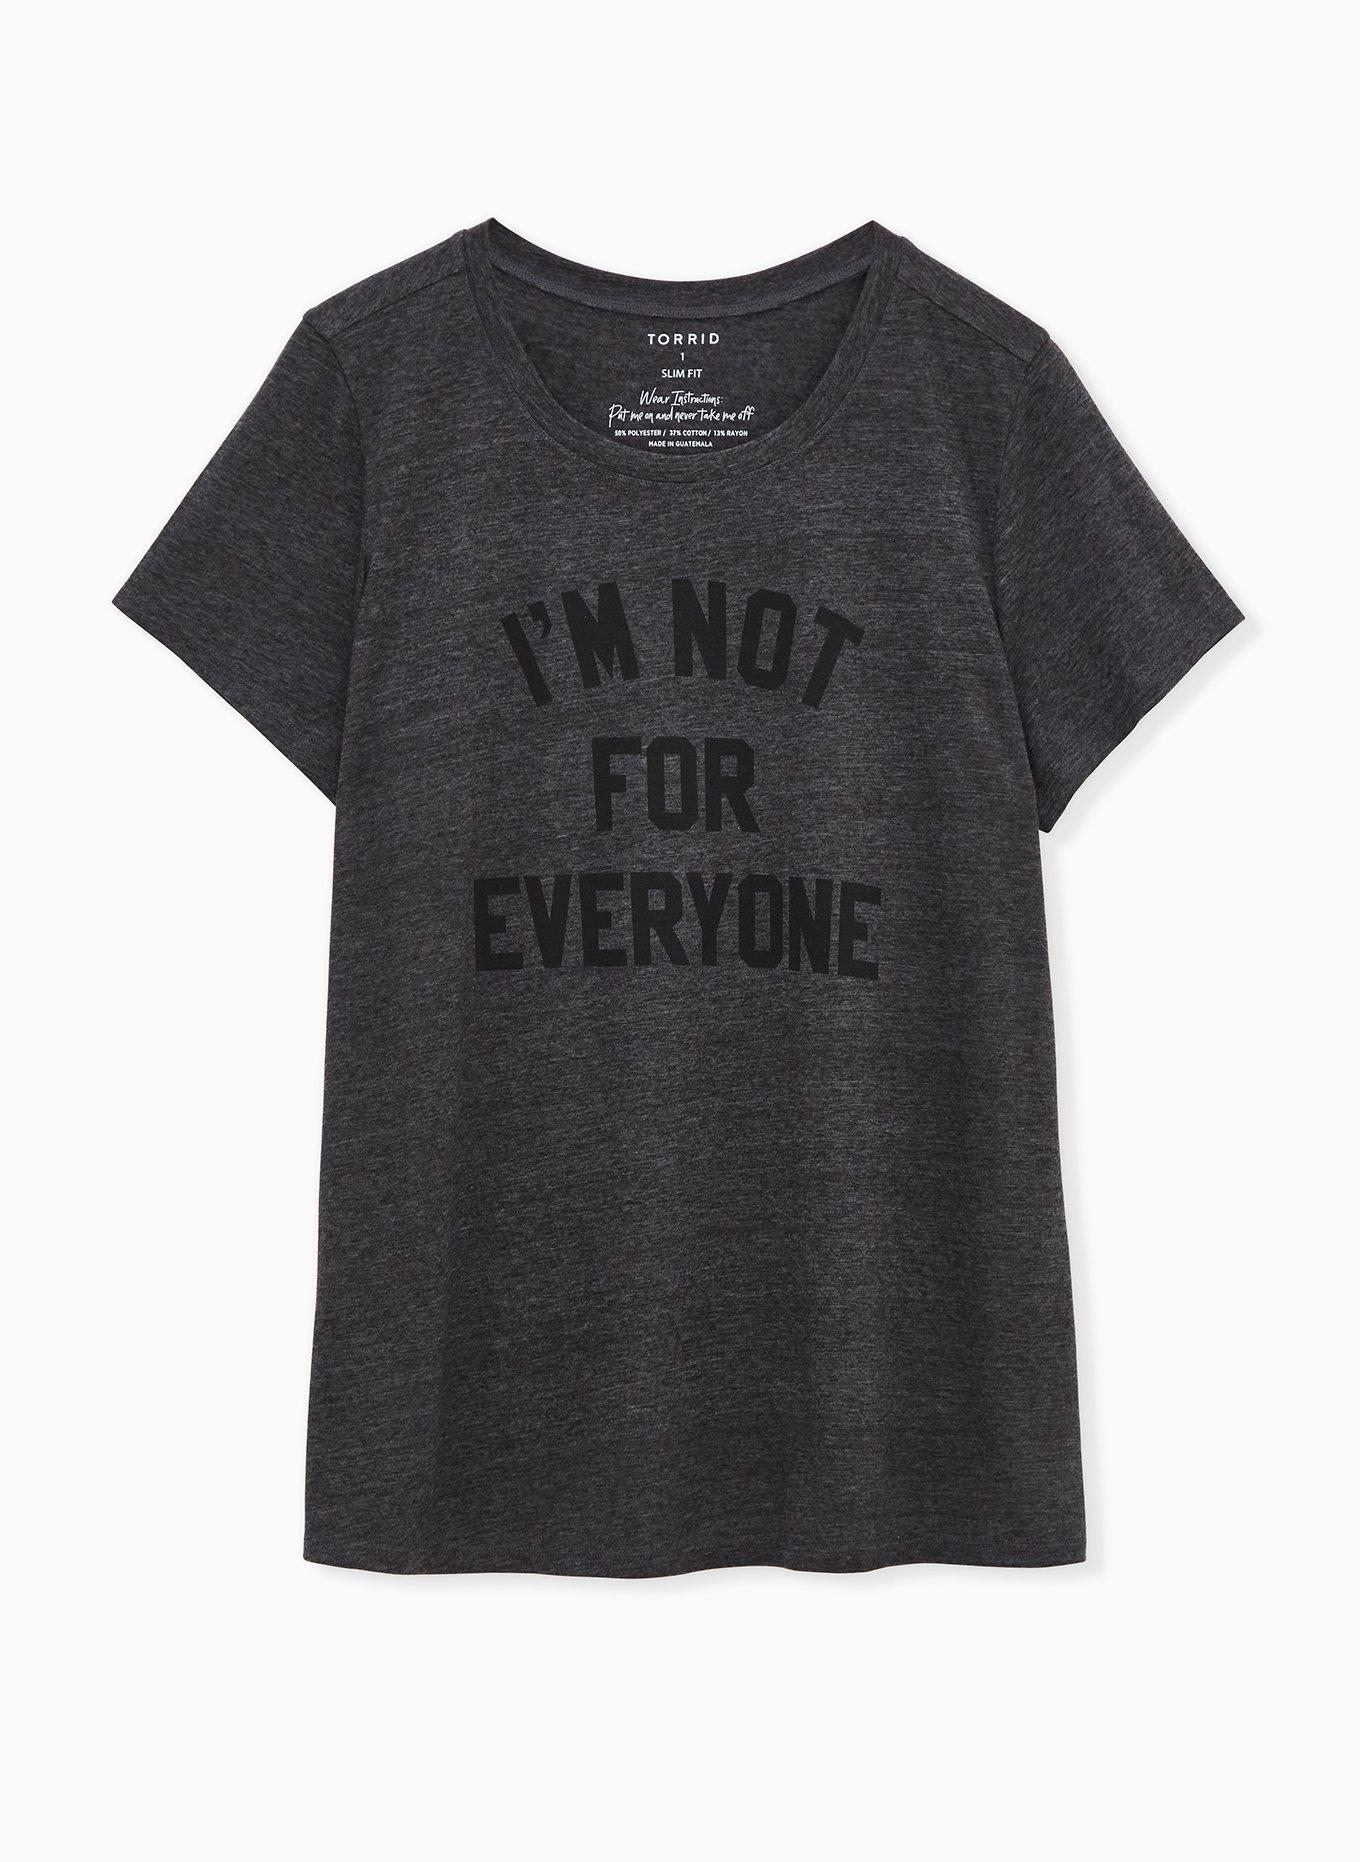 Plus Size - I'm Not For Everyone Slim Fit Crew Tee - Triblend Dark Grey ...